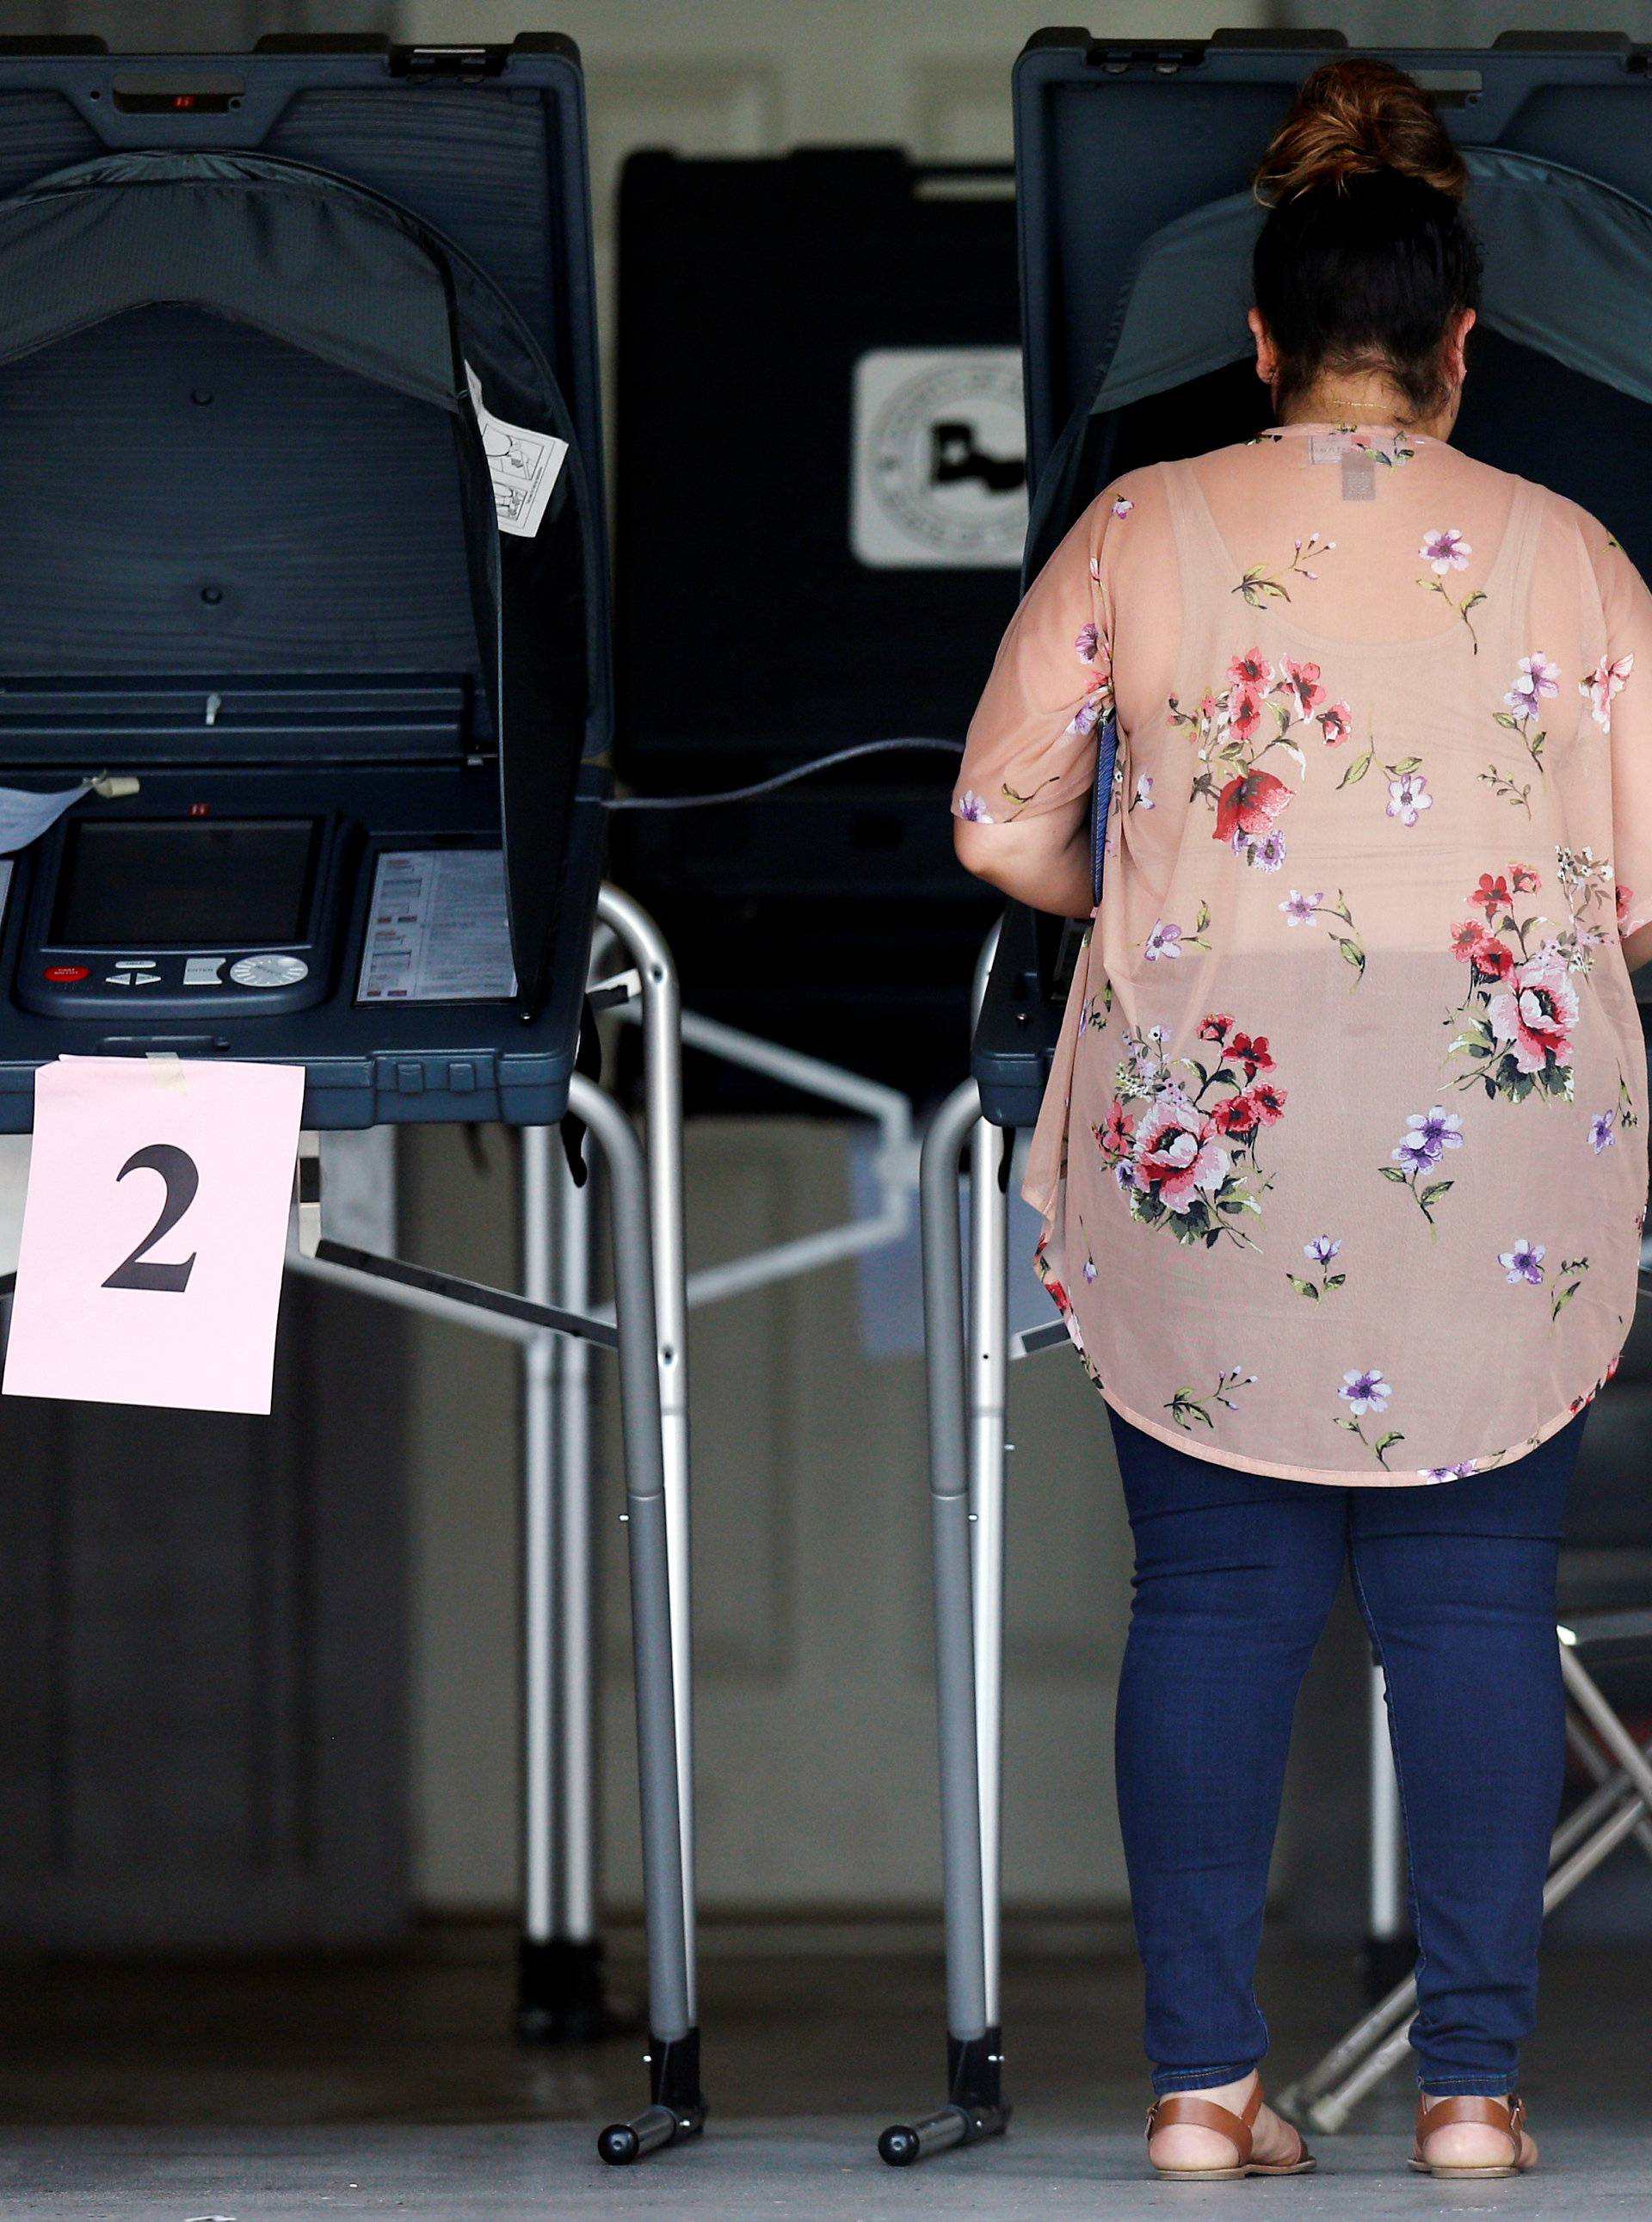 A woman votes at a polling station during the midterm elections in Houston